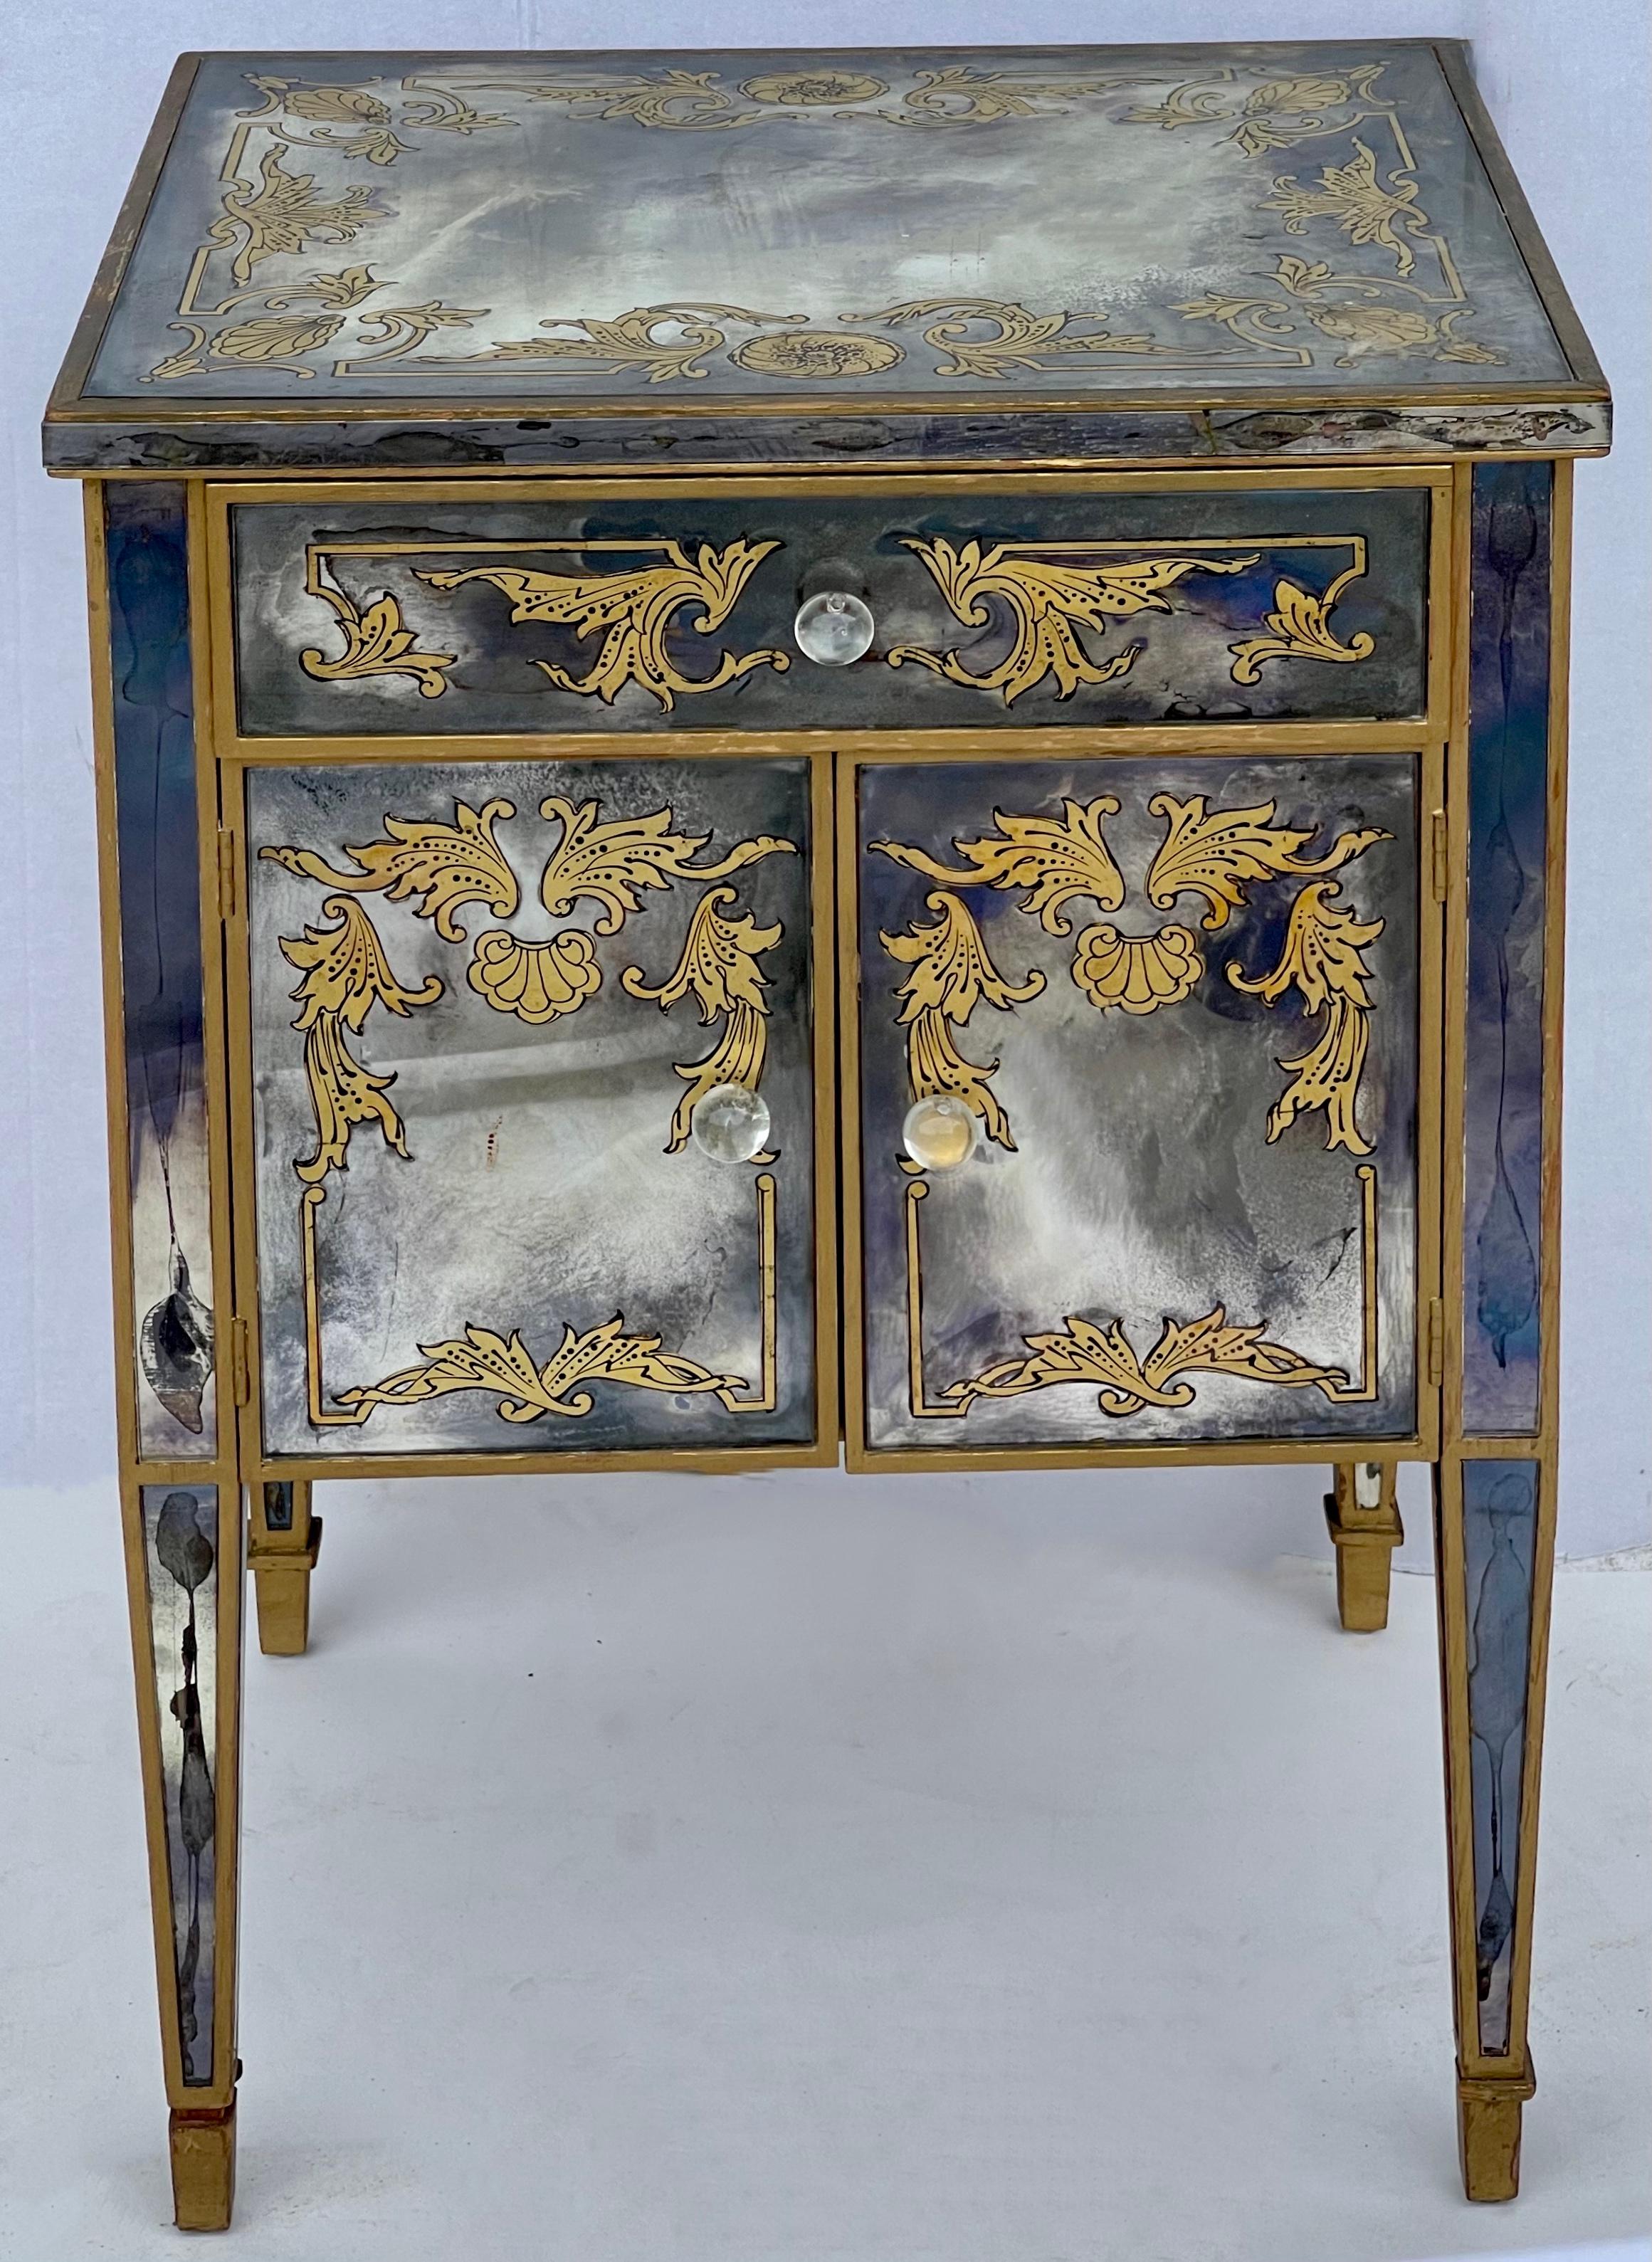 This is a pair of 960s French englomise mirrored chest or side tables attributed to Maison Jansen. They are not marked. The reverse painting is in gilt. They do show some age appropriate wear.